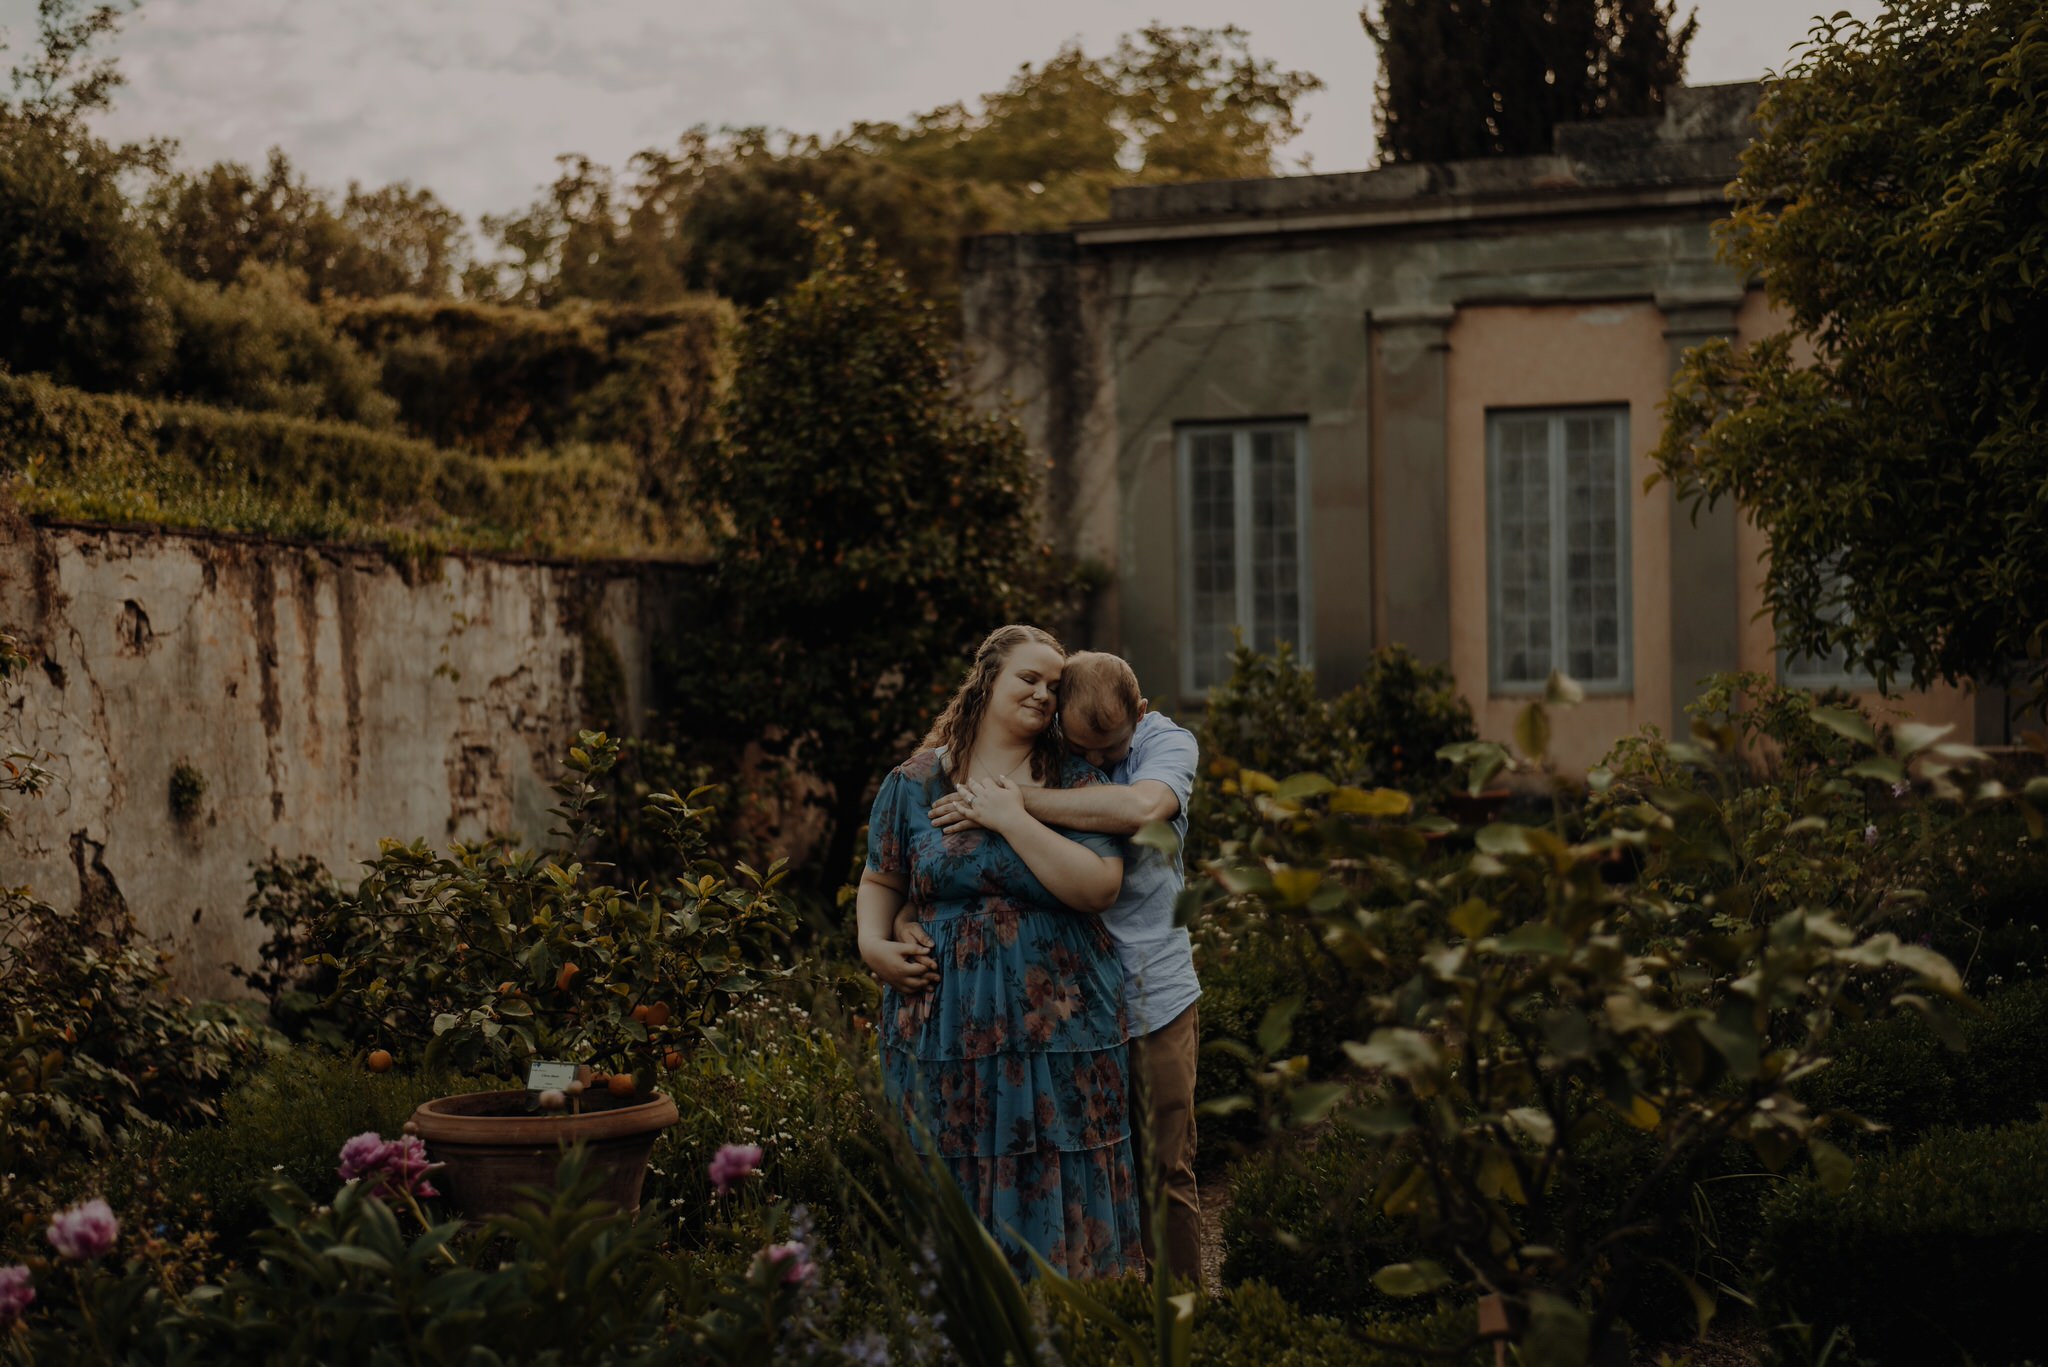 A Whimsical Engagement Session in the Afternoon in Florence's Marvelous Giardino di Boboli: Olivia and Sam's Romantic Adventure